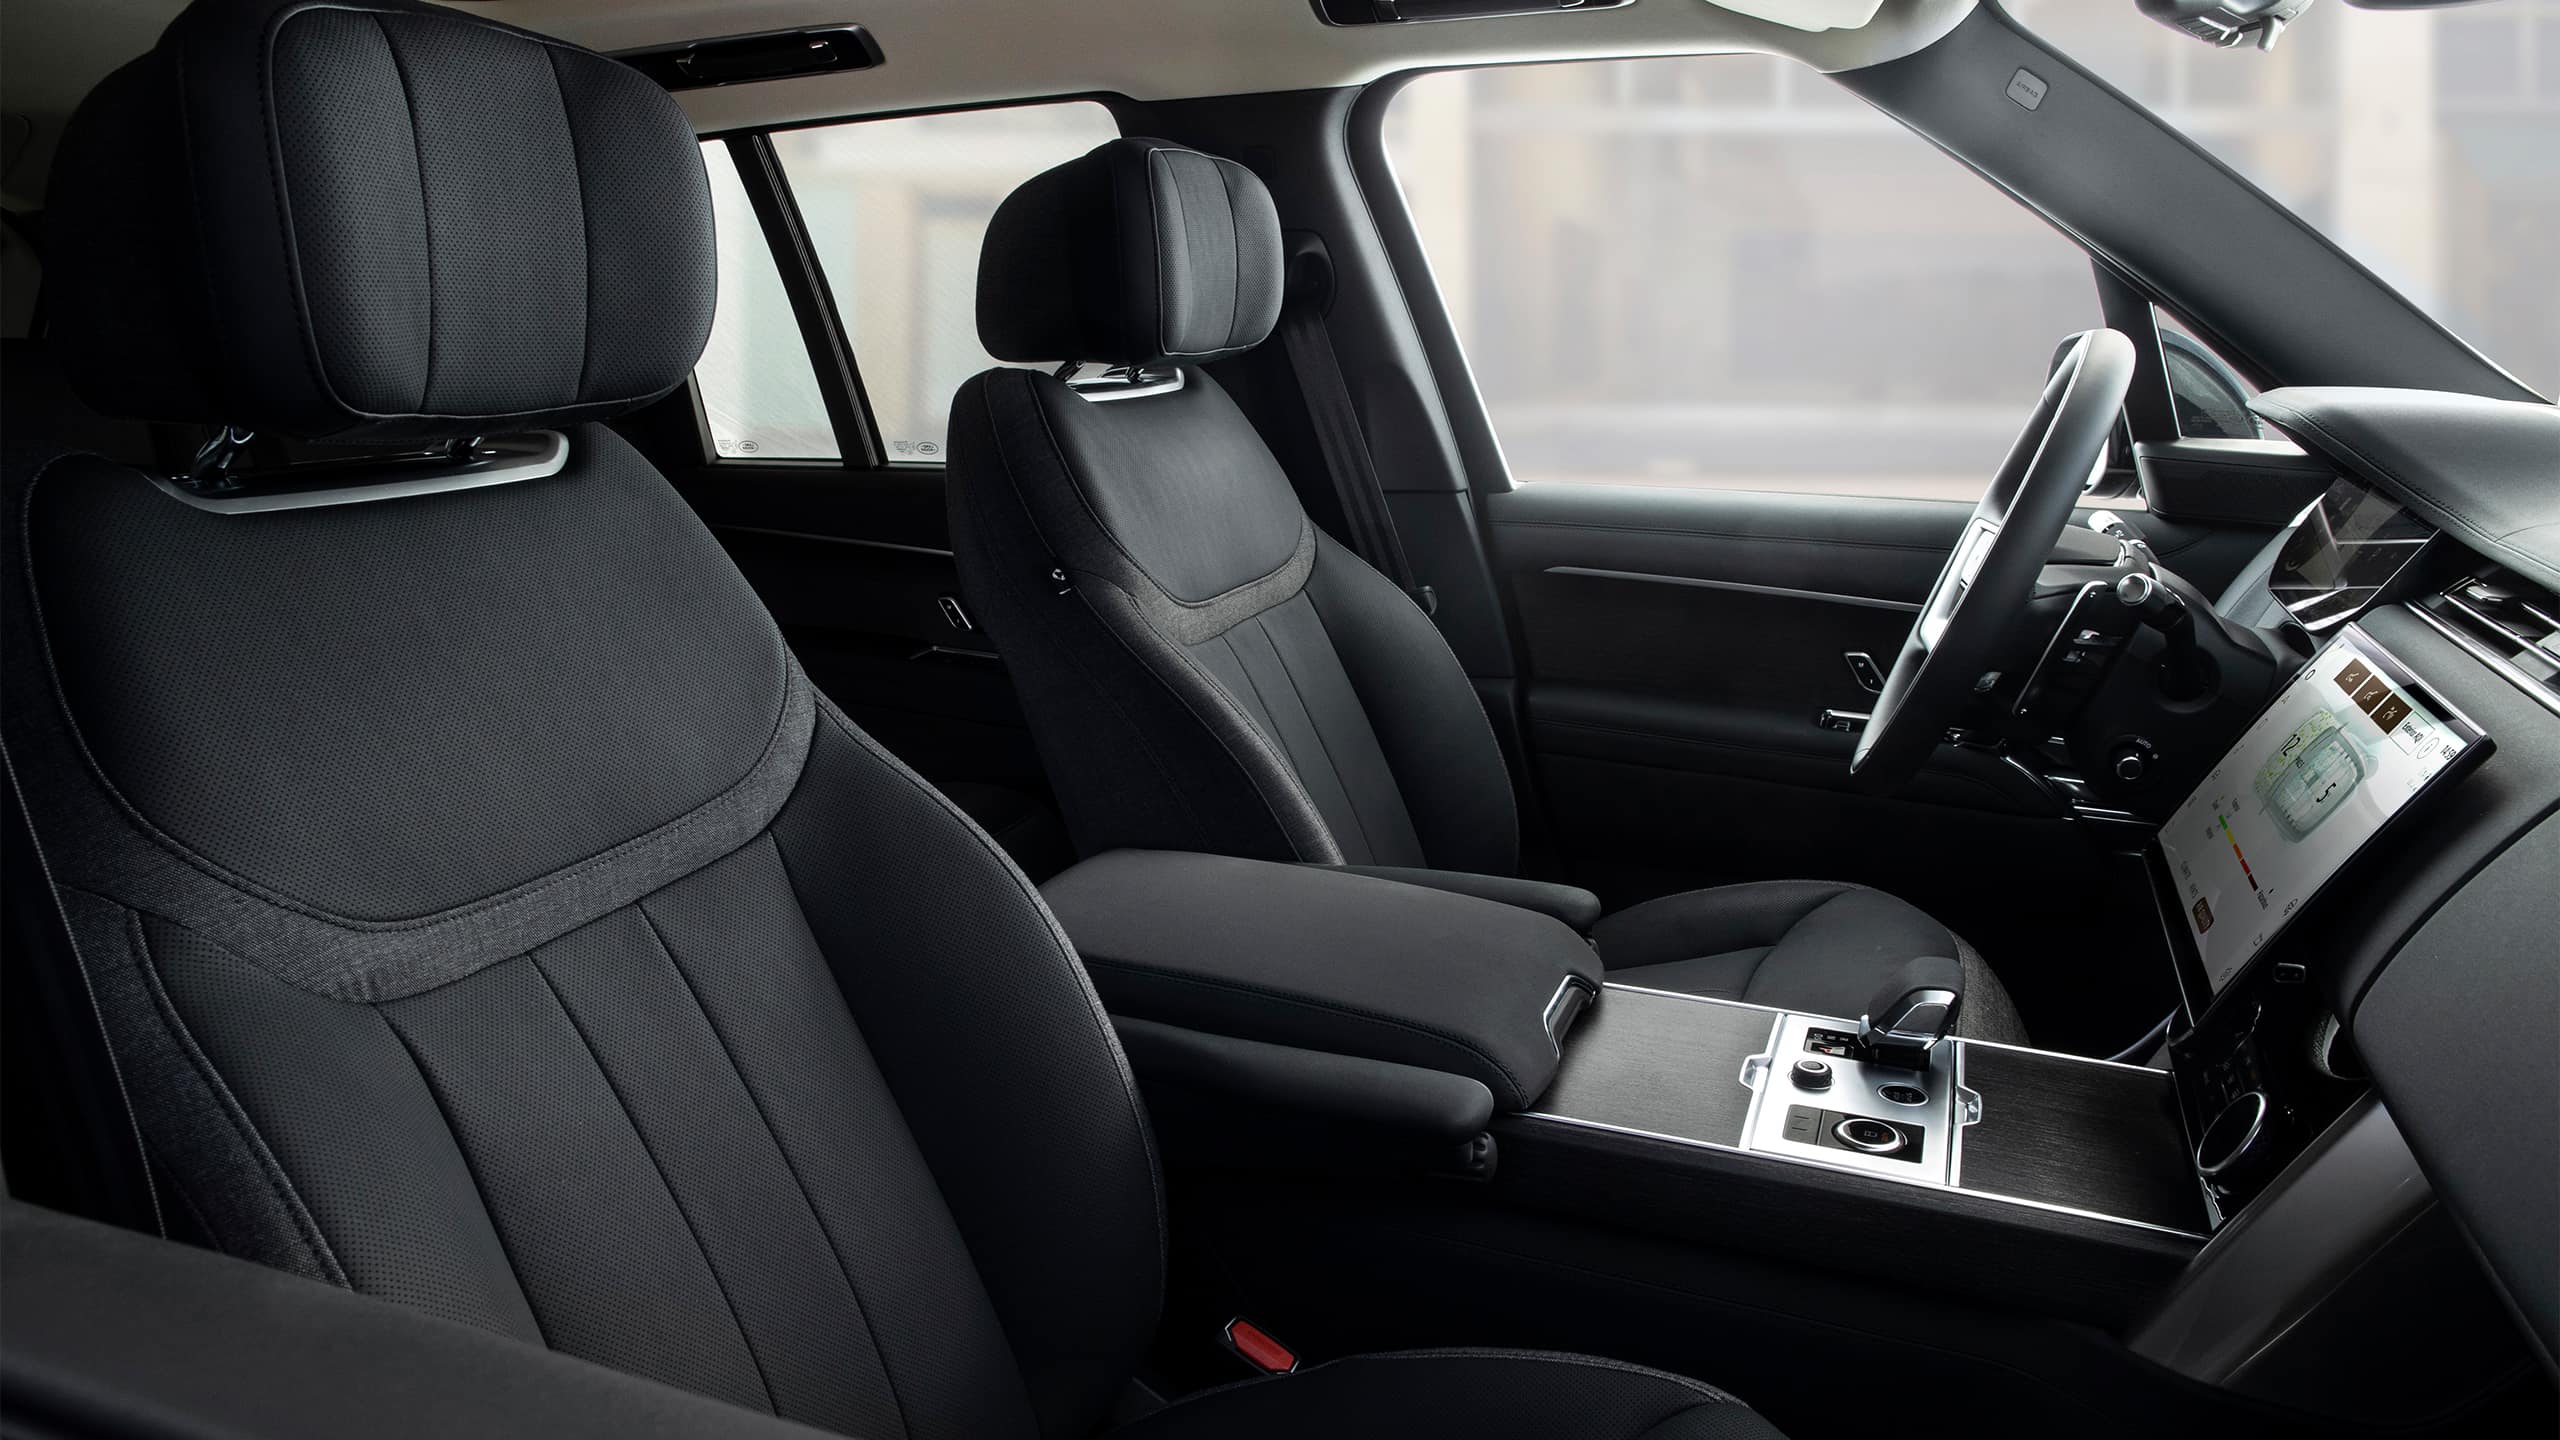 Range Rover Luxurious and Comfortable Interior